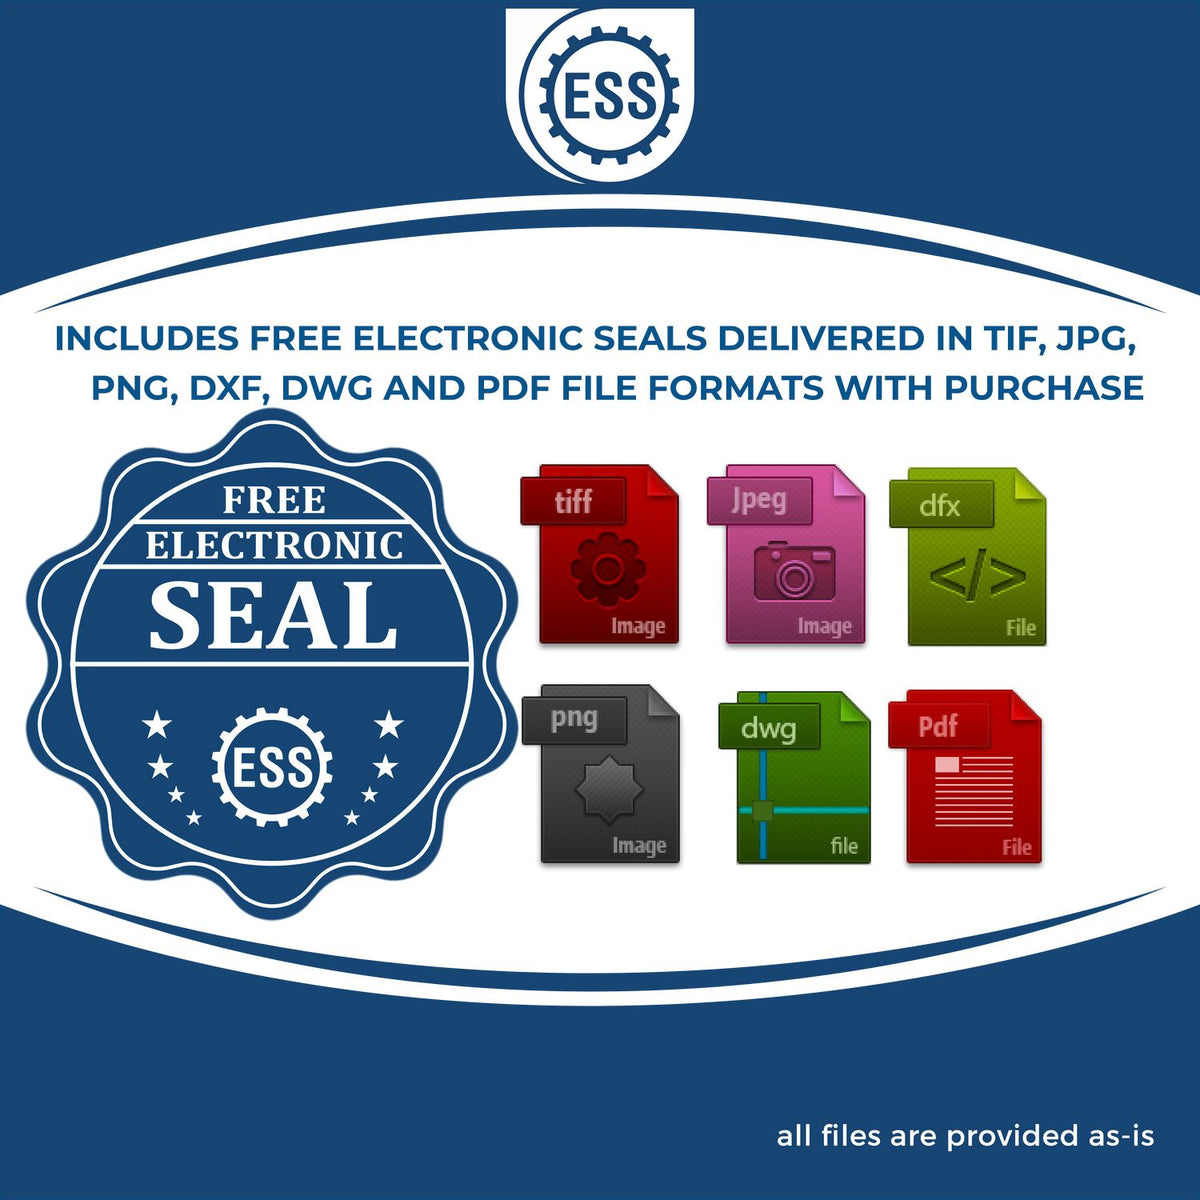 An infographic for the free electronic seal for the Texas Desk Architect Embossing Seal illustrating the different file type icons such as DXF, DWG, TIF, JPG and PNG.